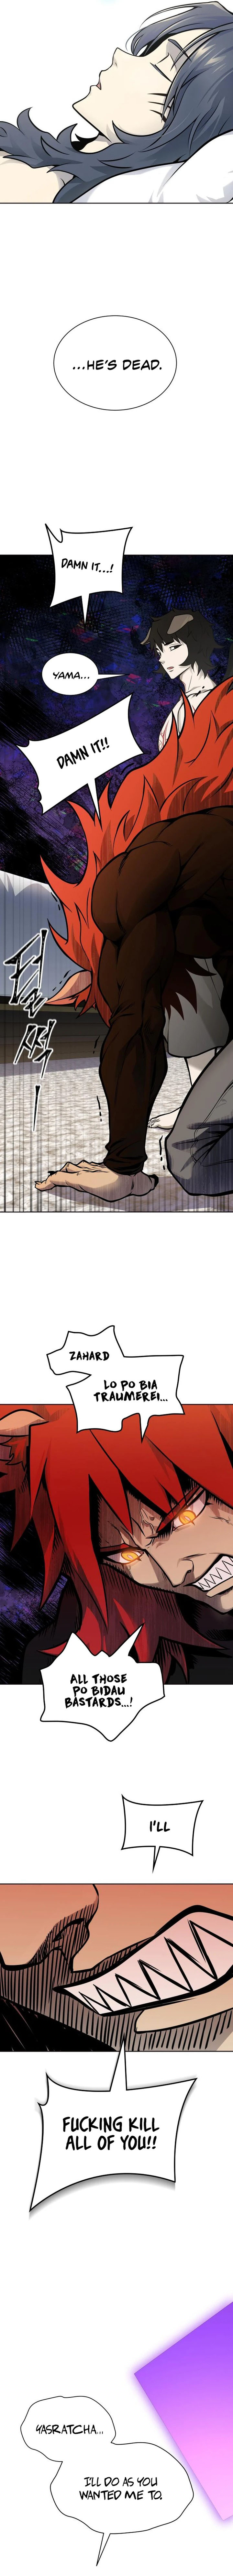 Tower Of God 590 17